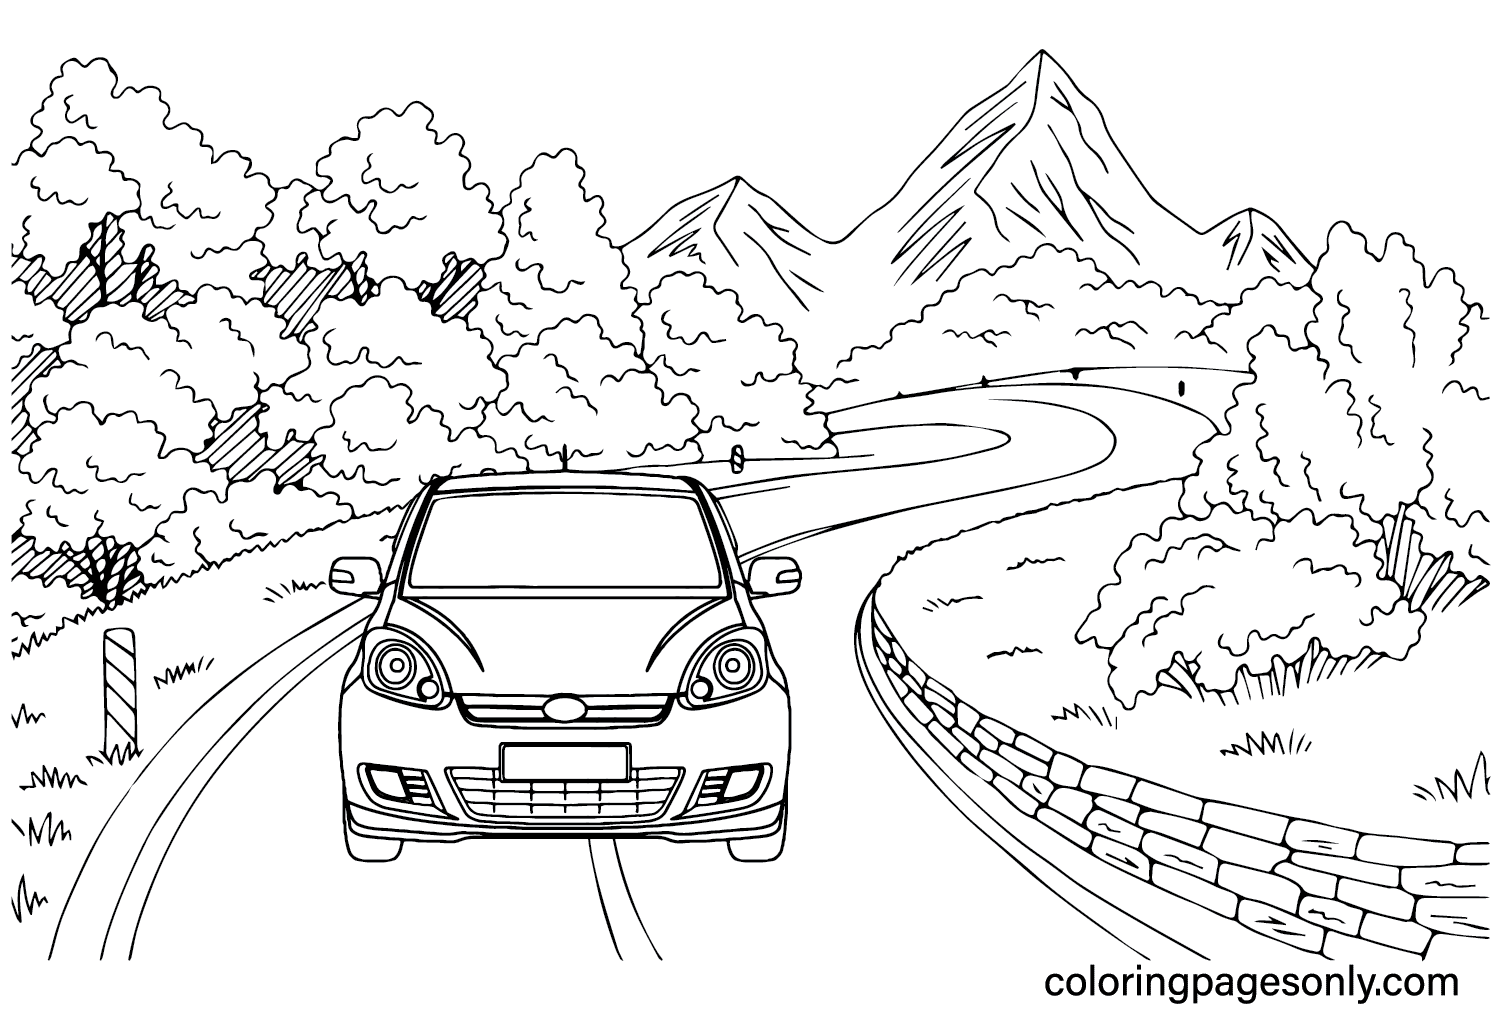 Perodua Myvi Hatchback Coloring Page from Perodua